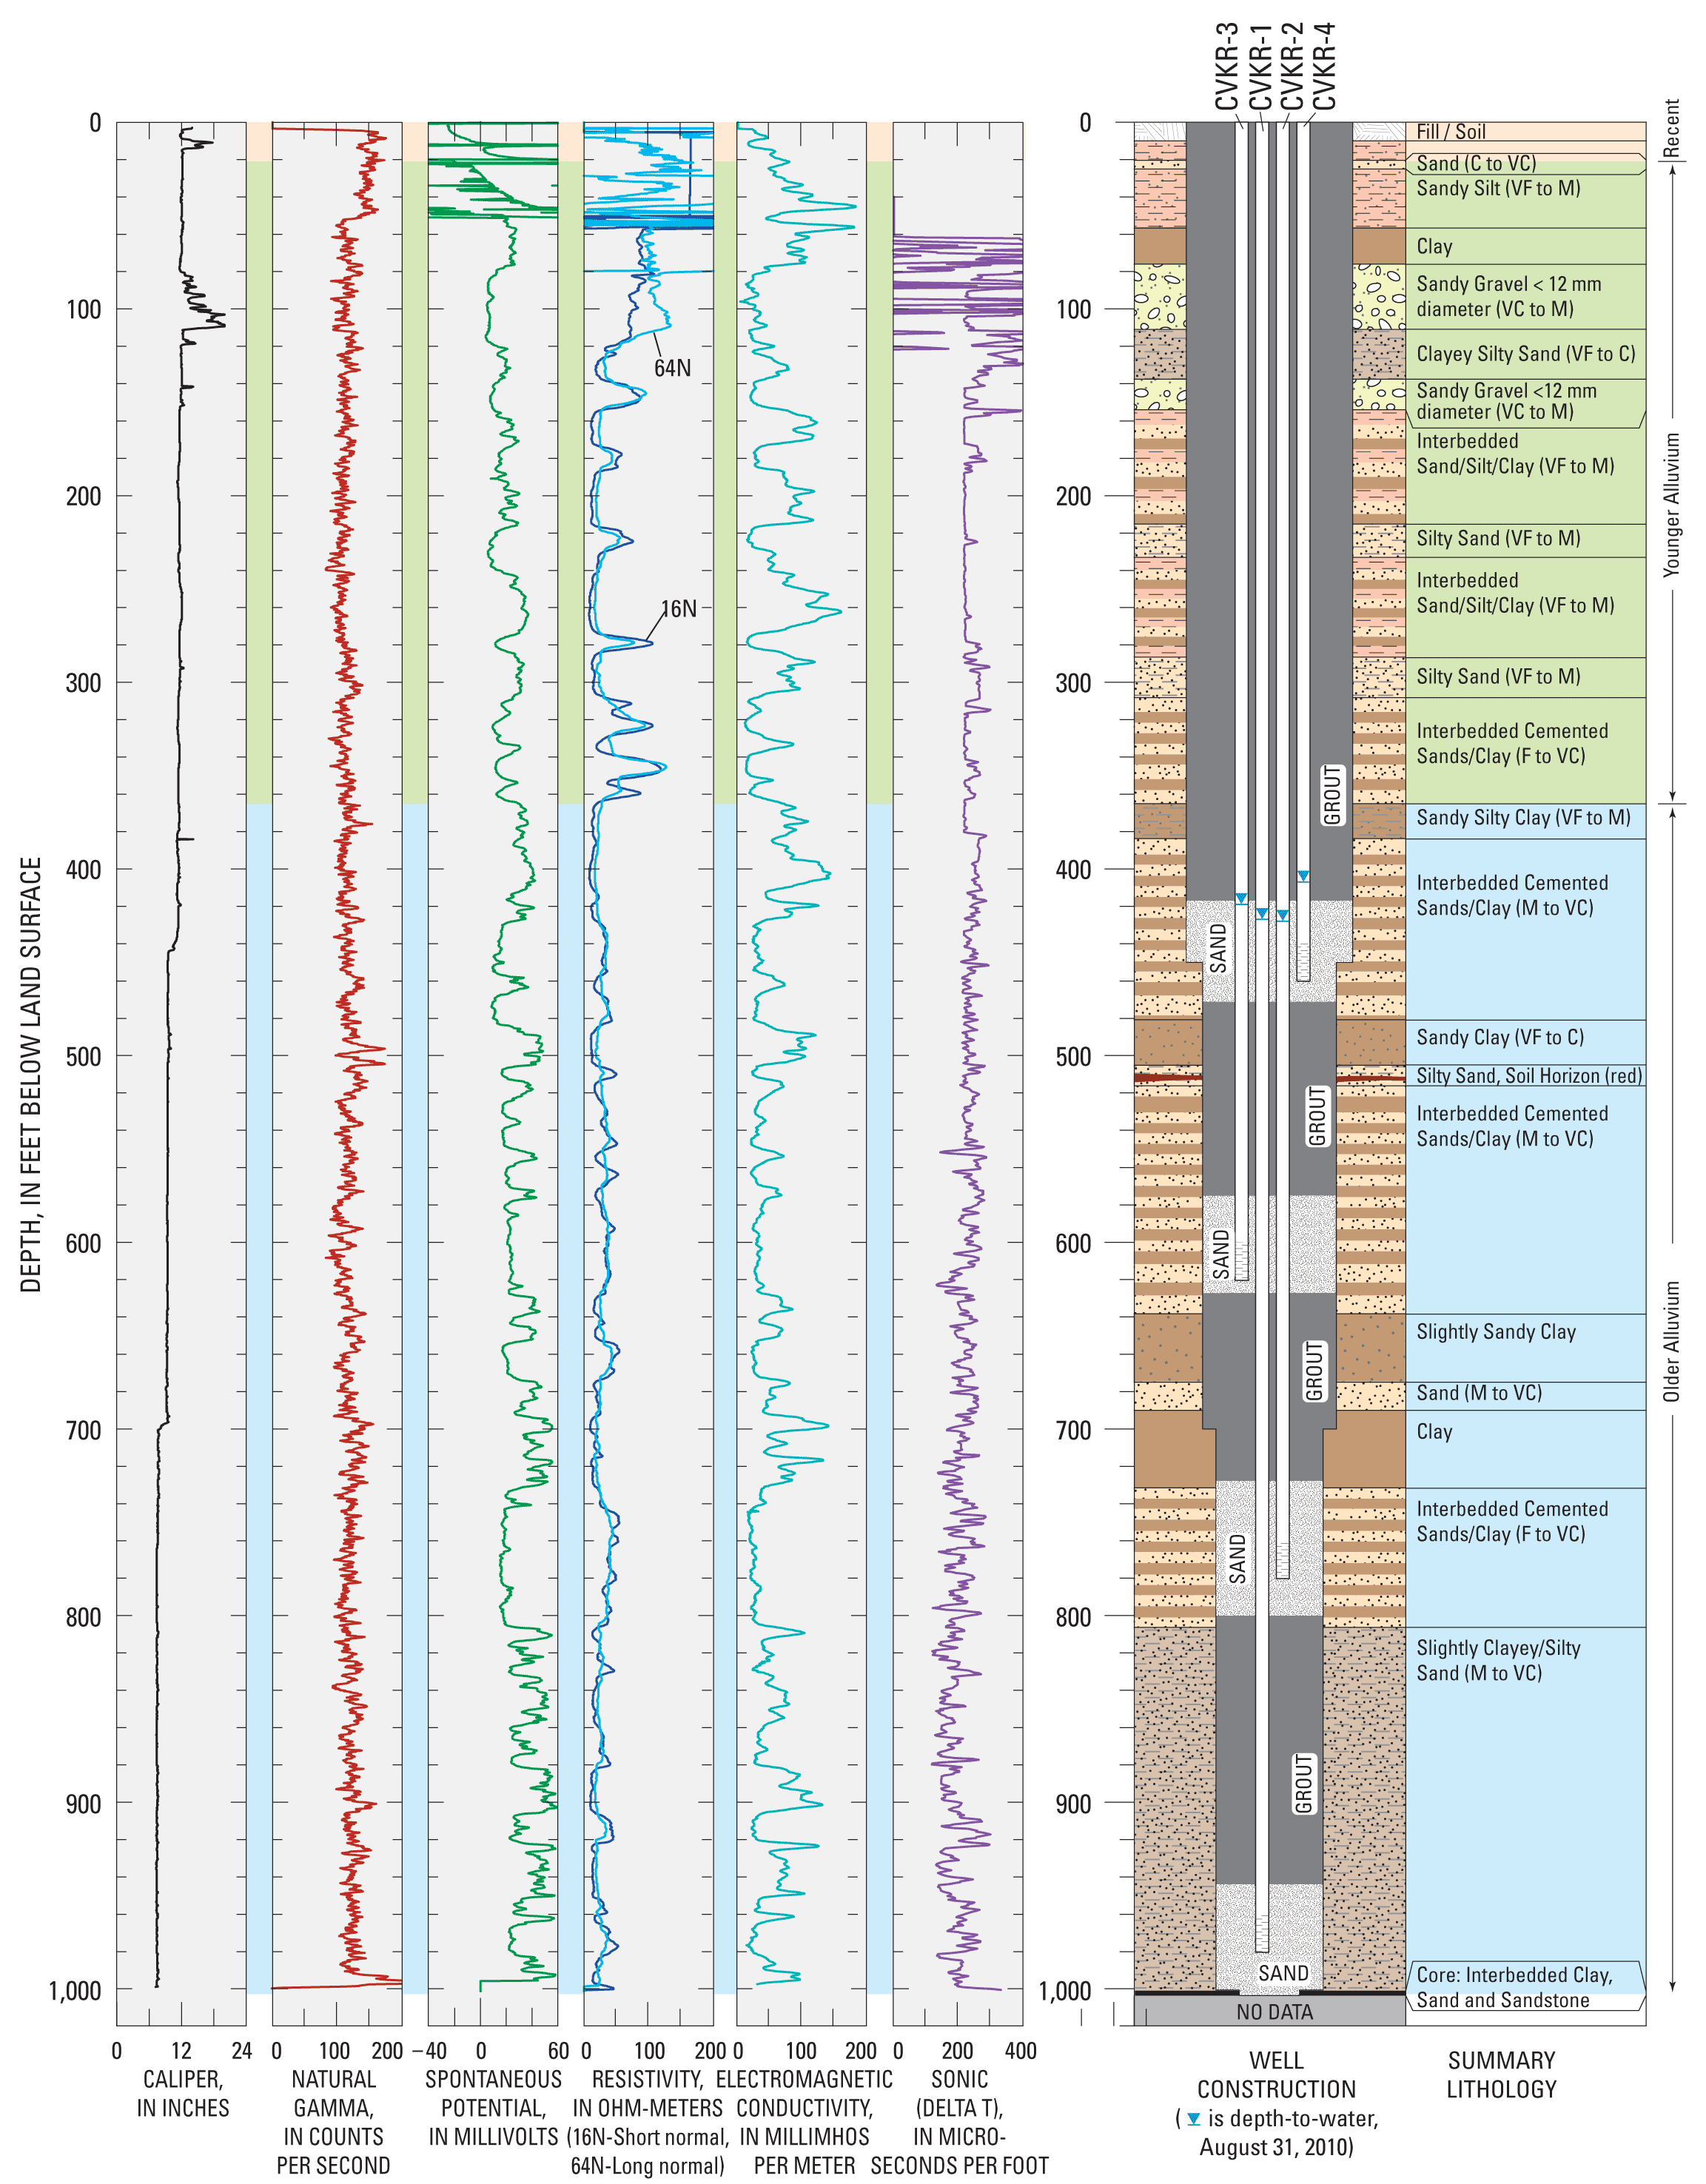 Diagram of well construction, summary lithology, and geophysical log data from multiple-well monitoring site CVKR, Cuyama Valley, California.